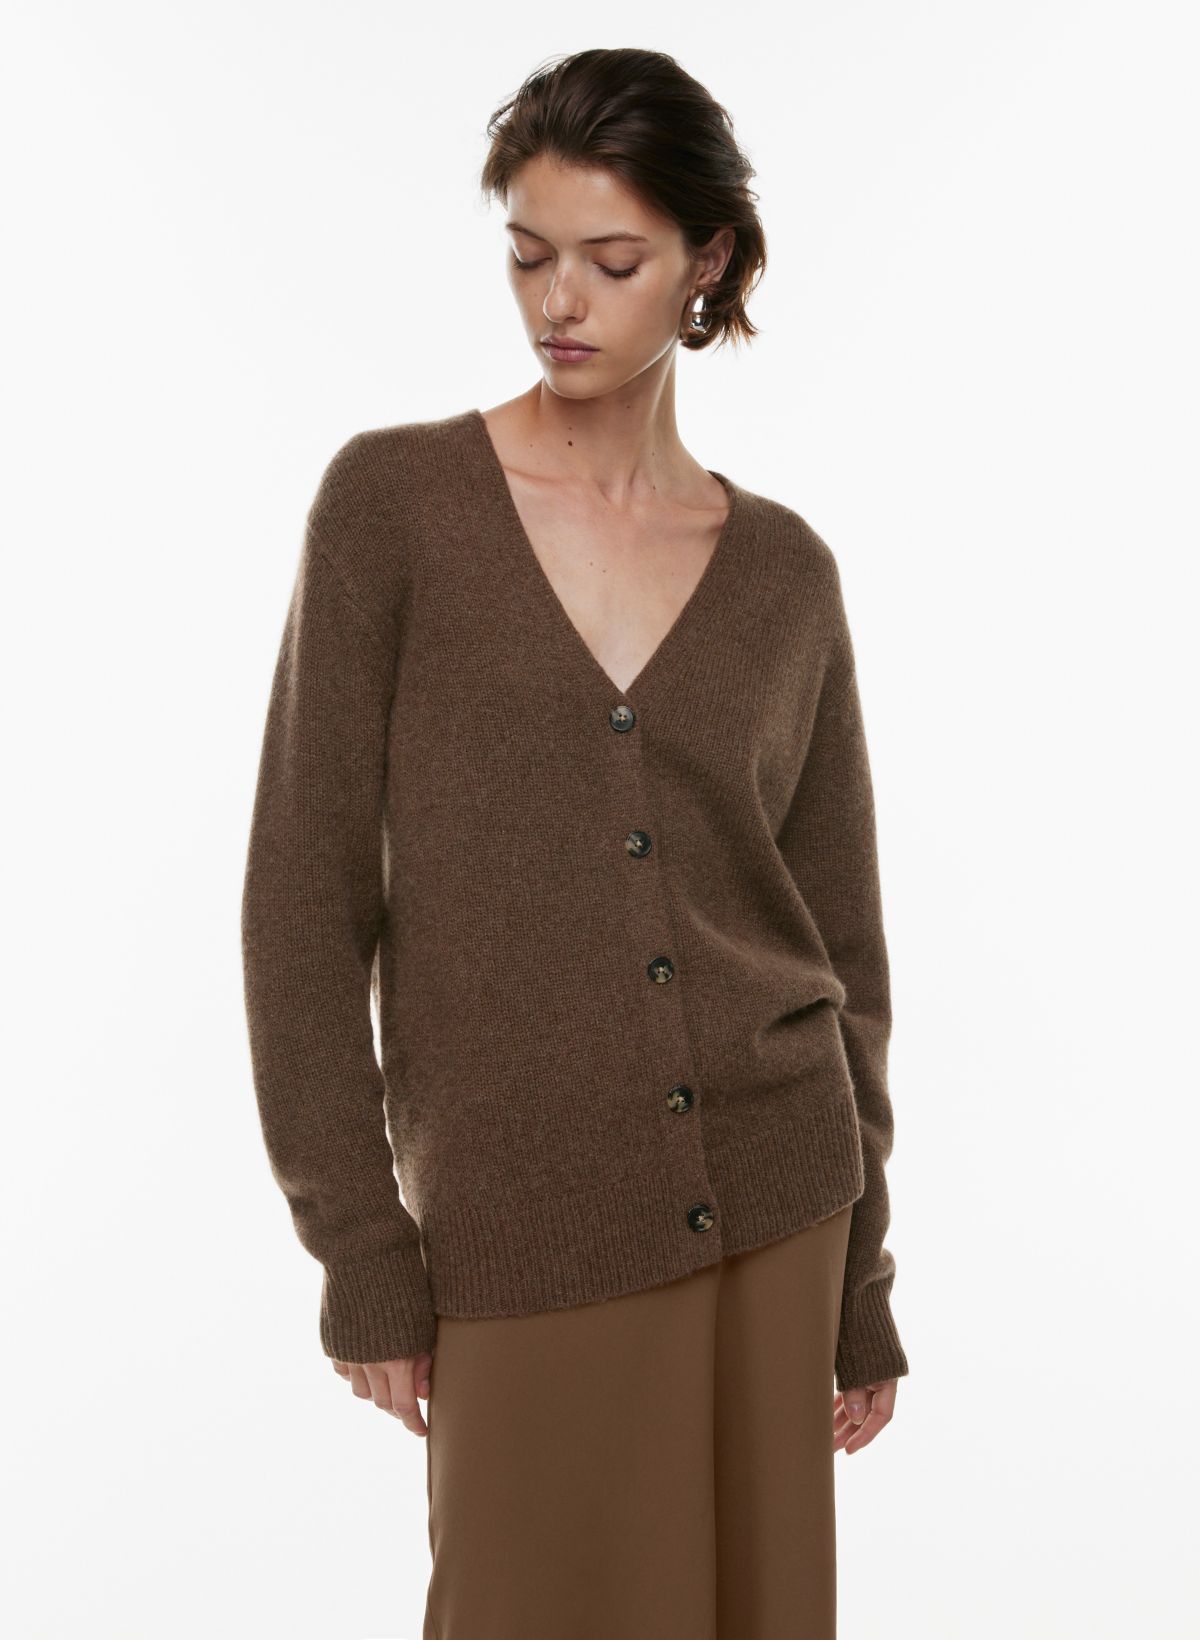 Wilfred Women's Luxe Cashmere Parco Sweater in Heather Cocoa Bean size XS